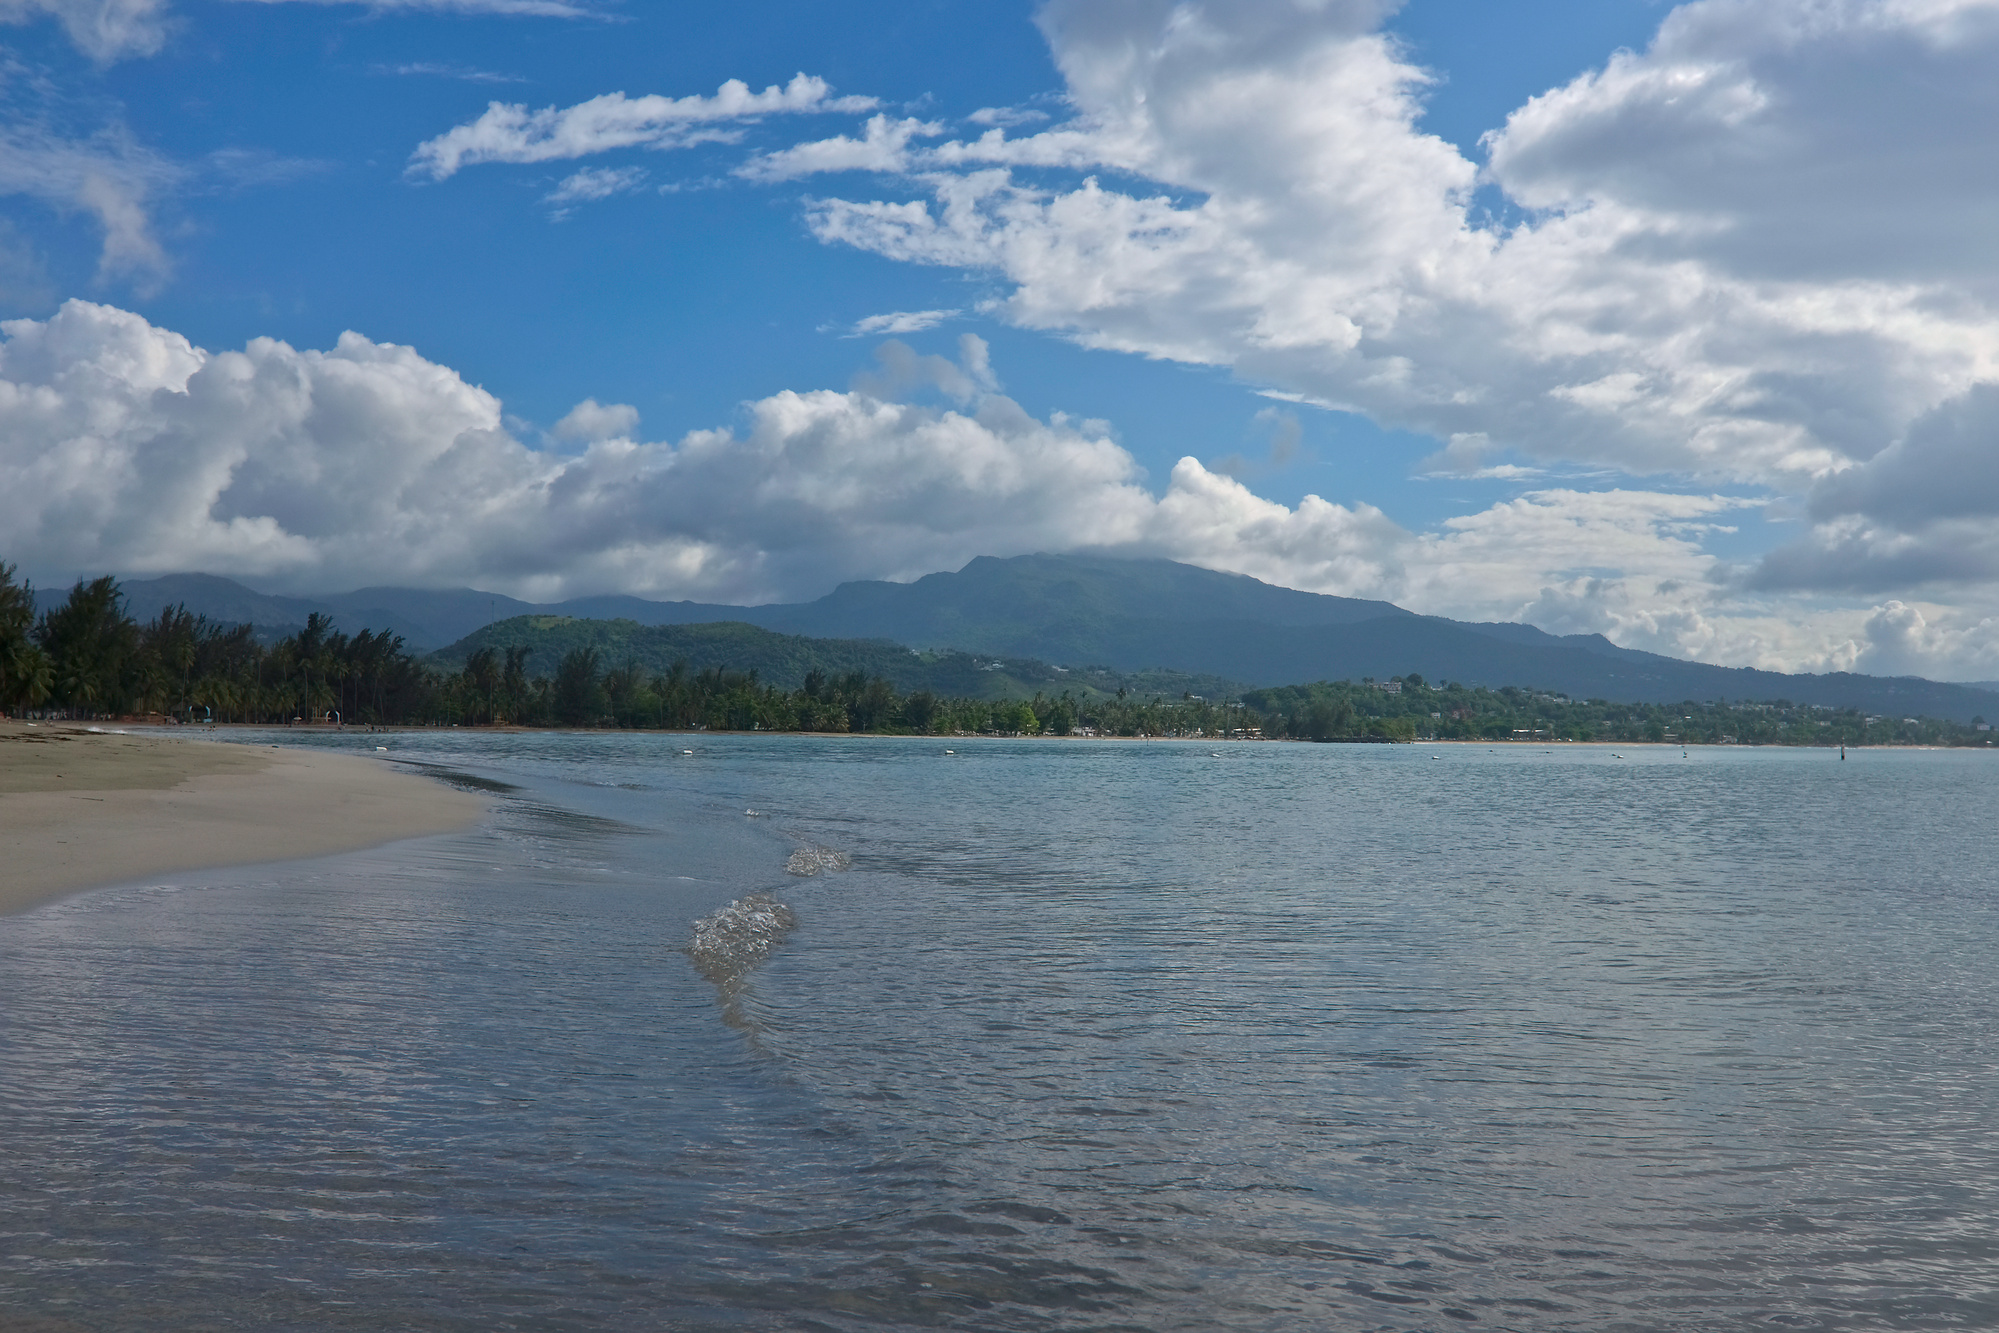 A view of Playa de Luquillo with the mountains in the background